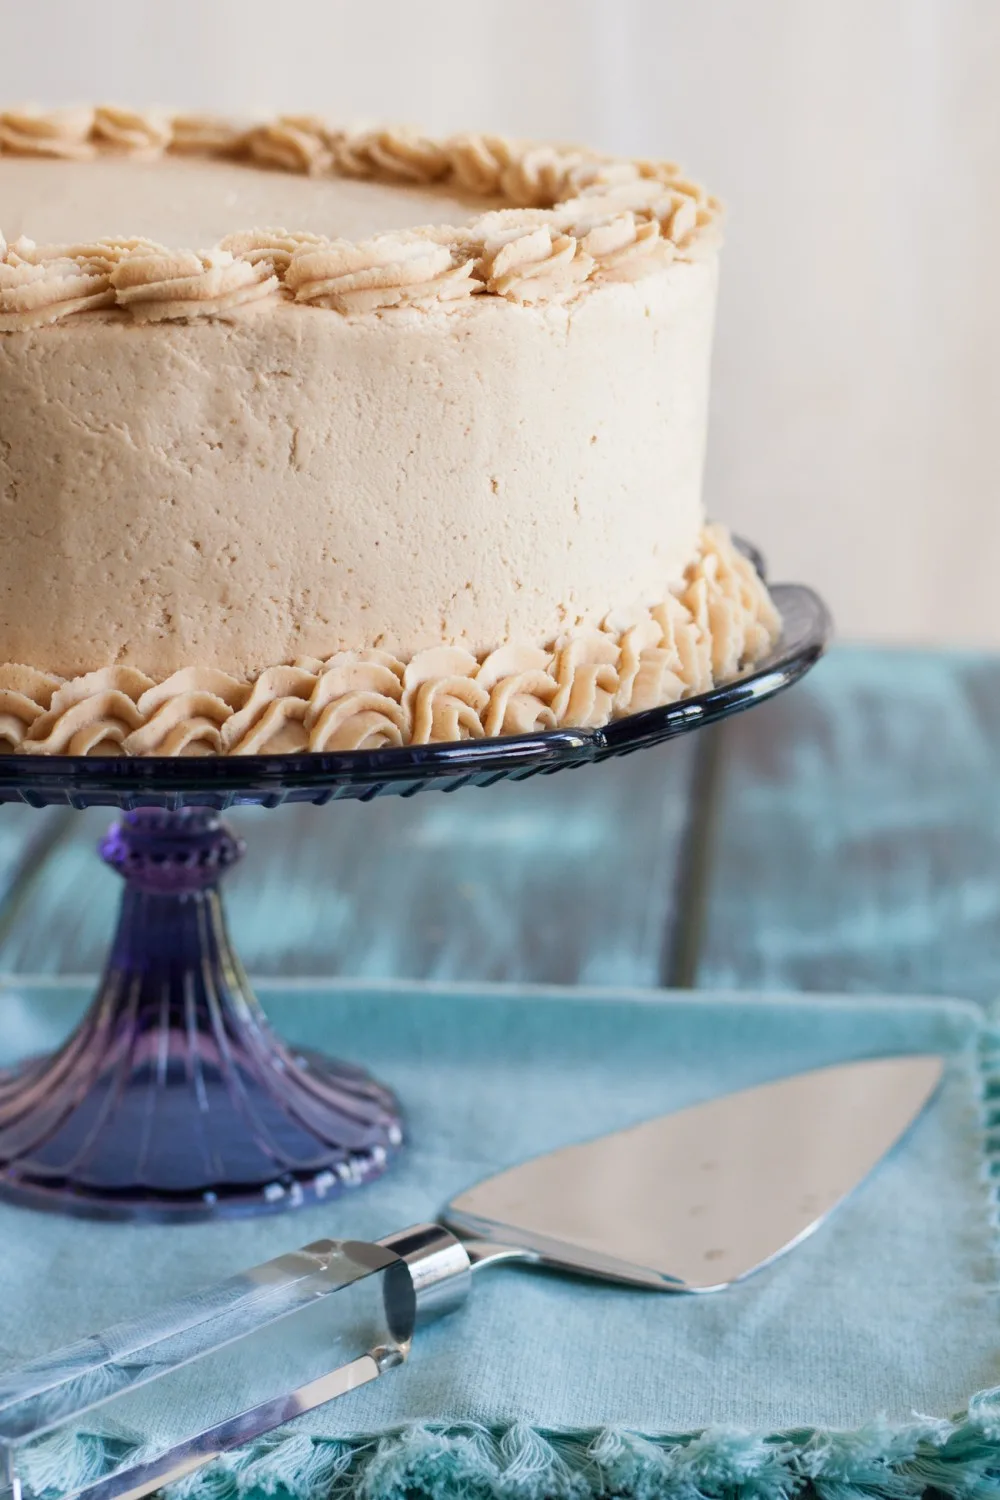 This is the cake for peanut butter lovers! Old Fashioned Peanut Butter Cake with a rich and creamy peanut butter frosting! * GoodieGodmother.com